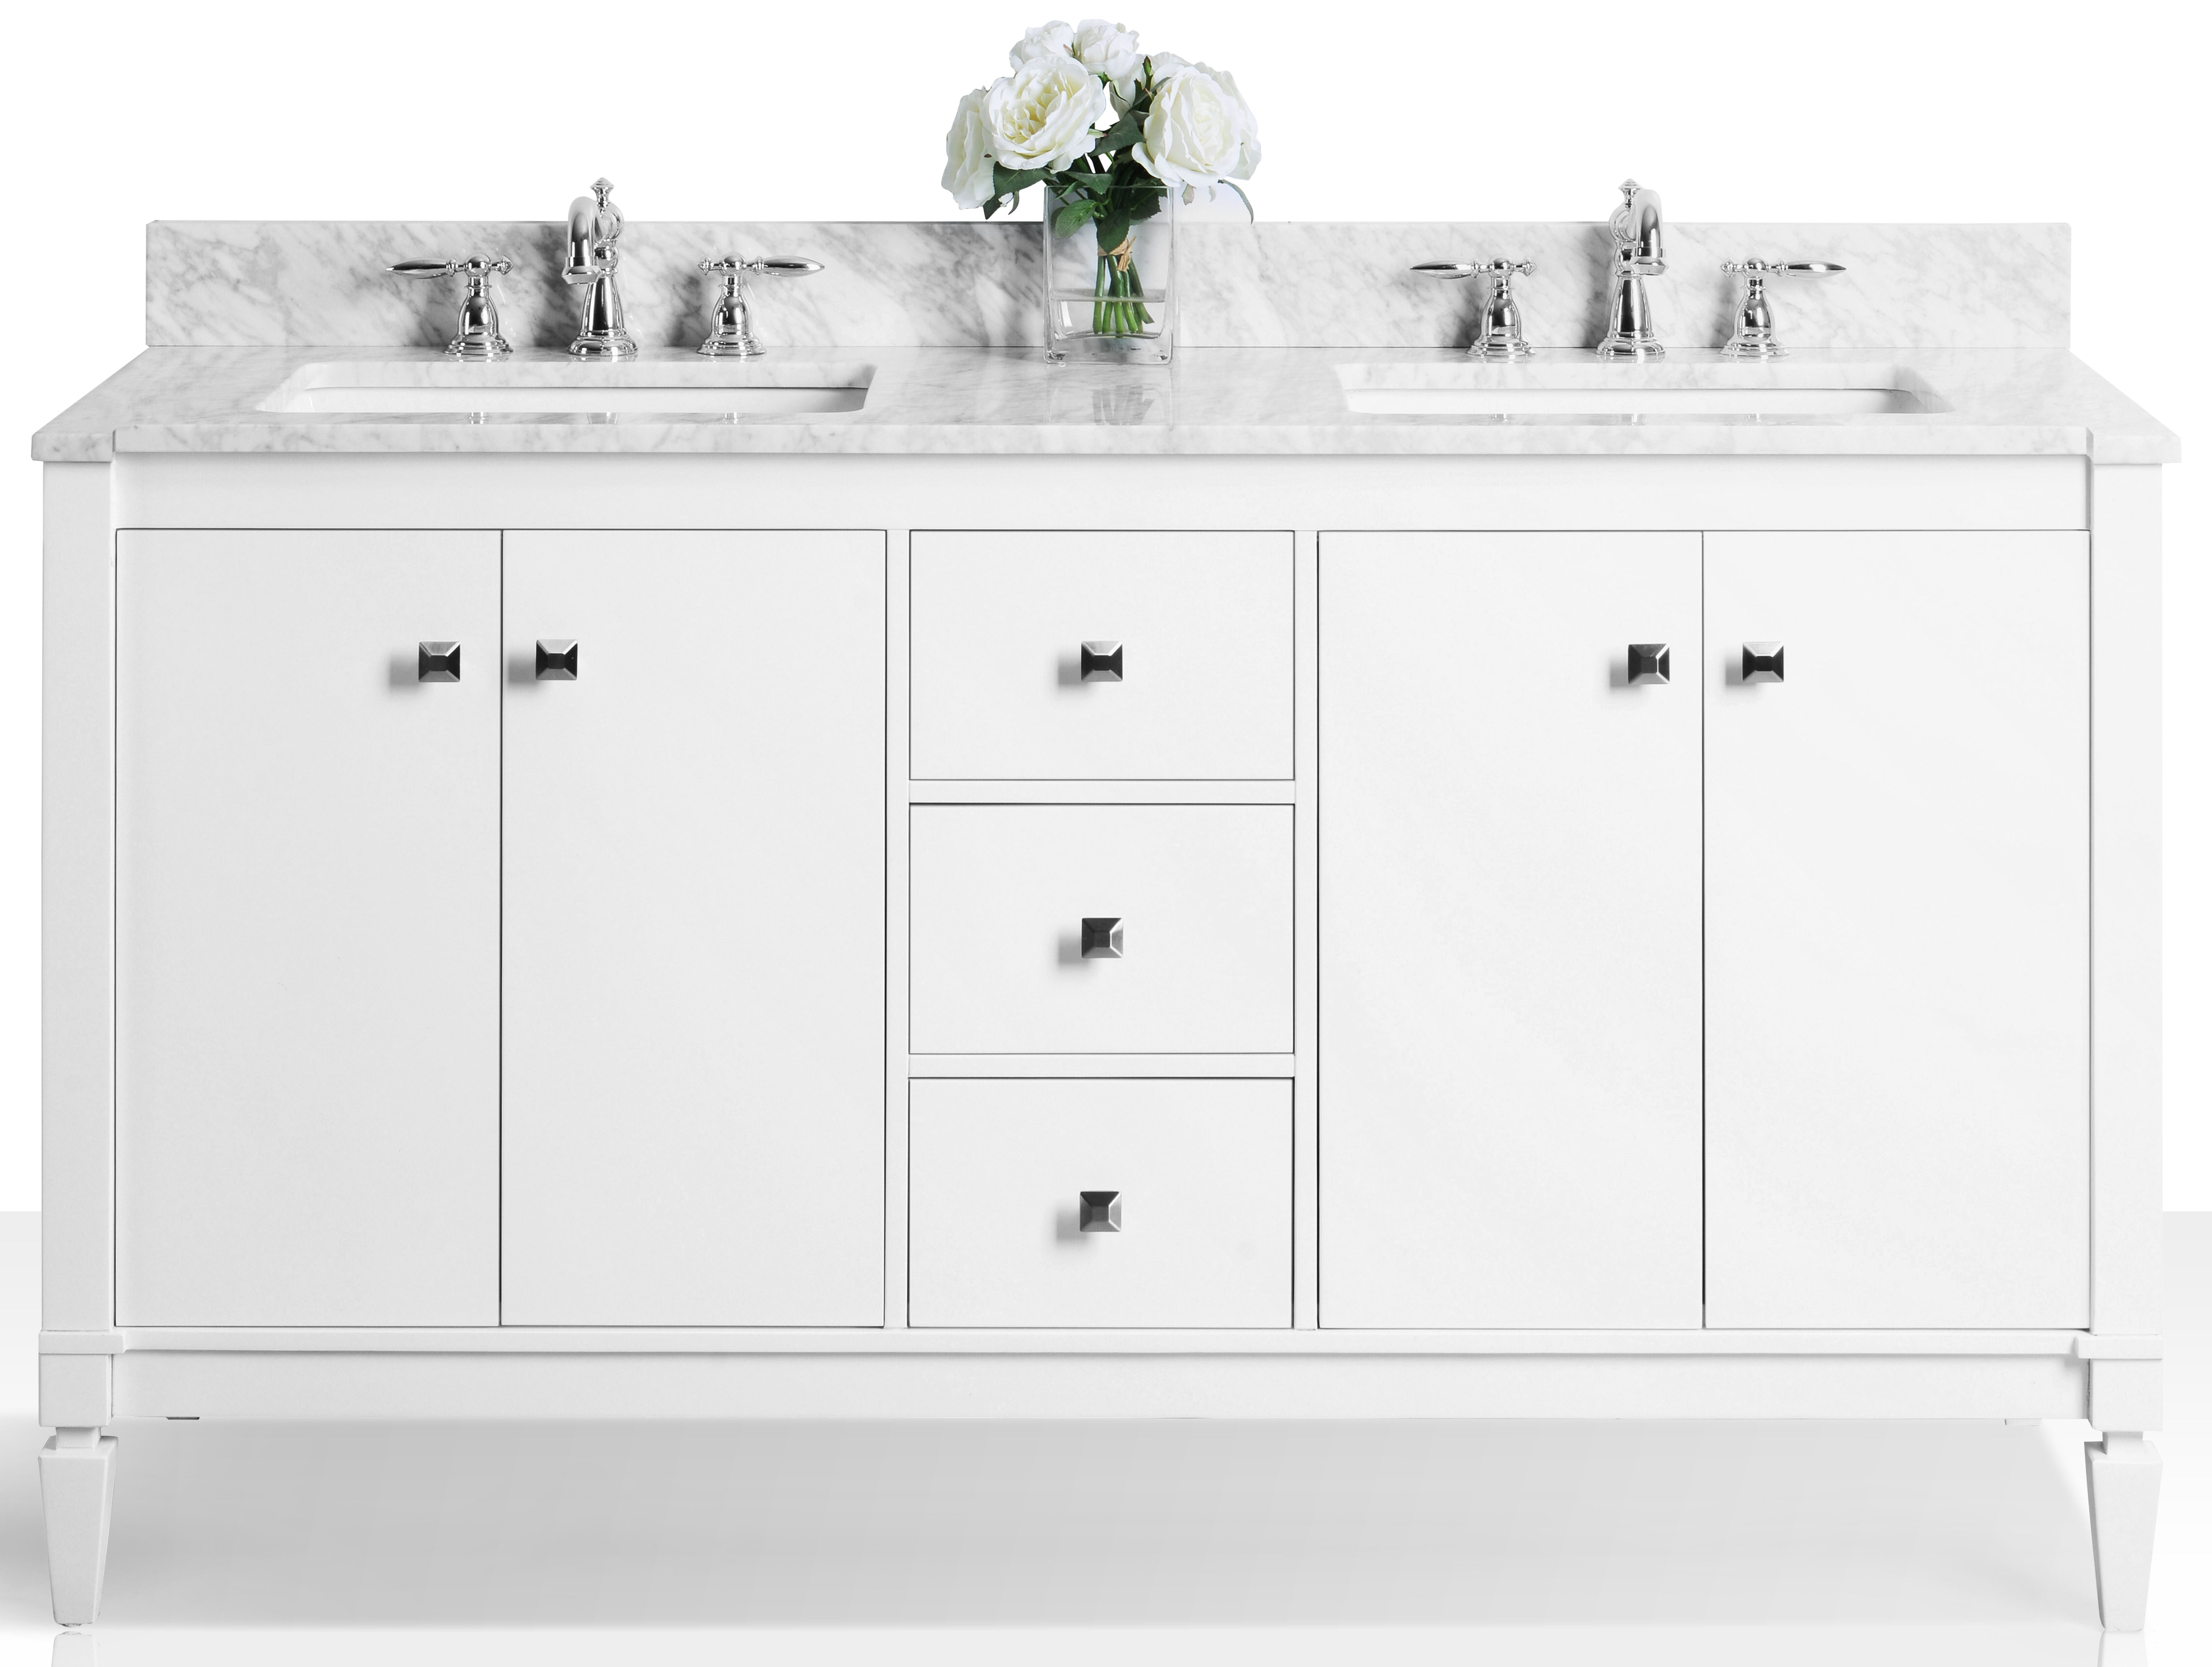 60" Double Sink Bath Vanity Set in White Finish with Italian Carrara White Marble Vanity top and White Undermount Basin